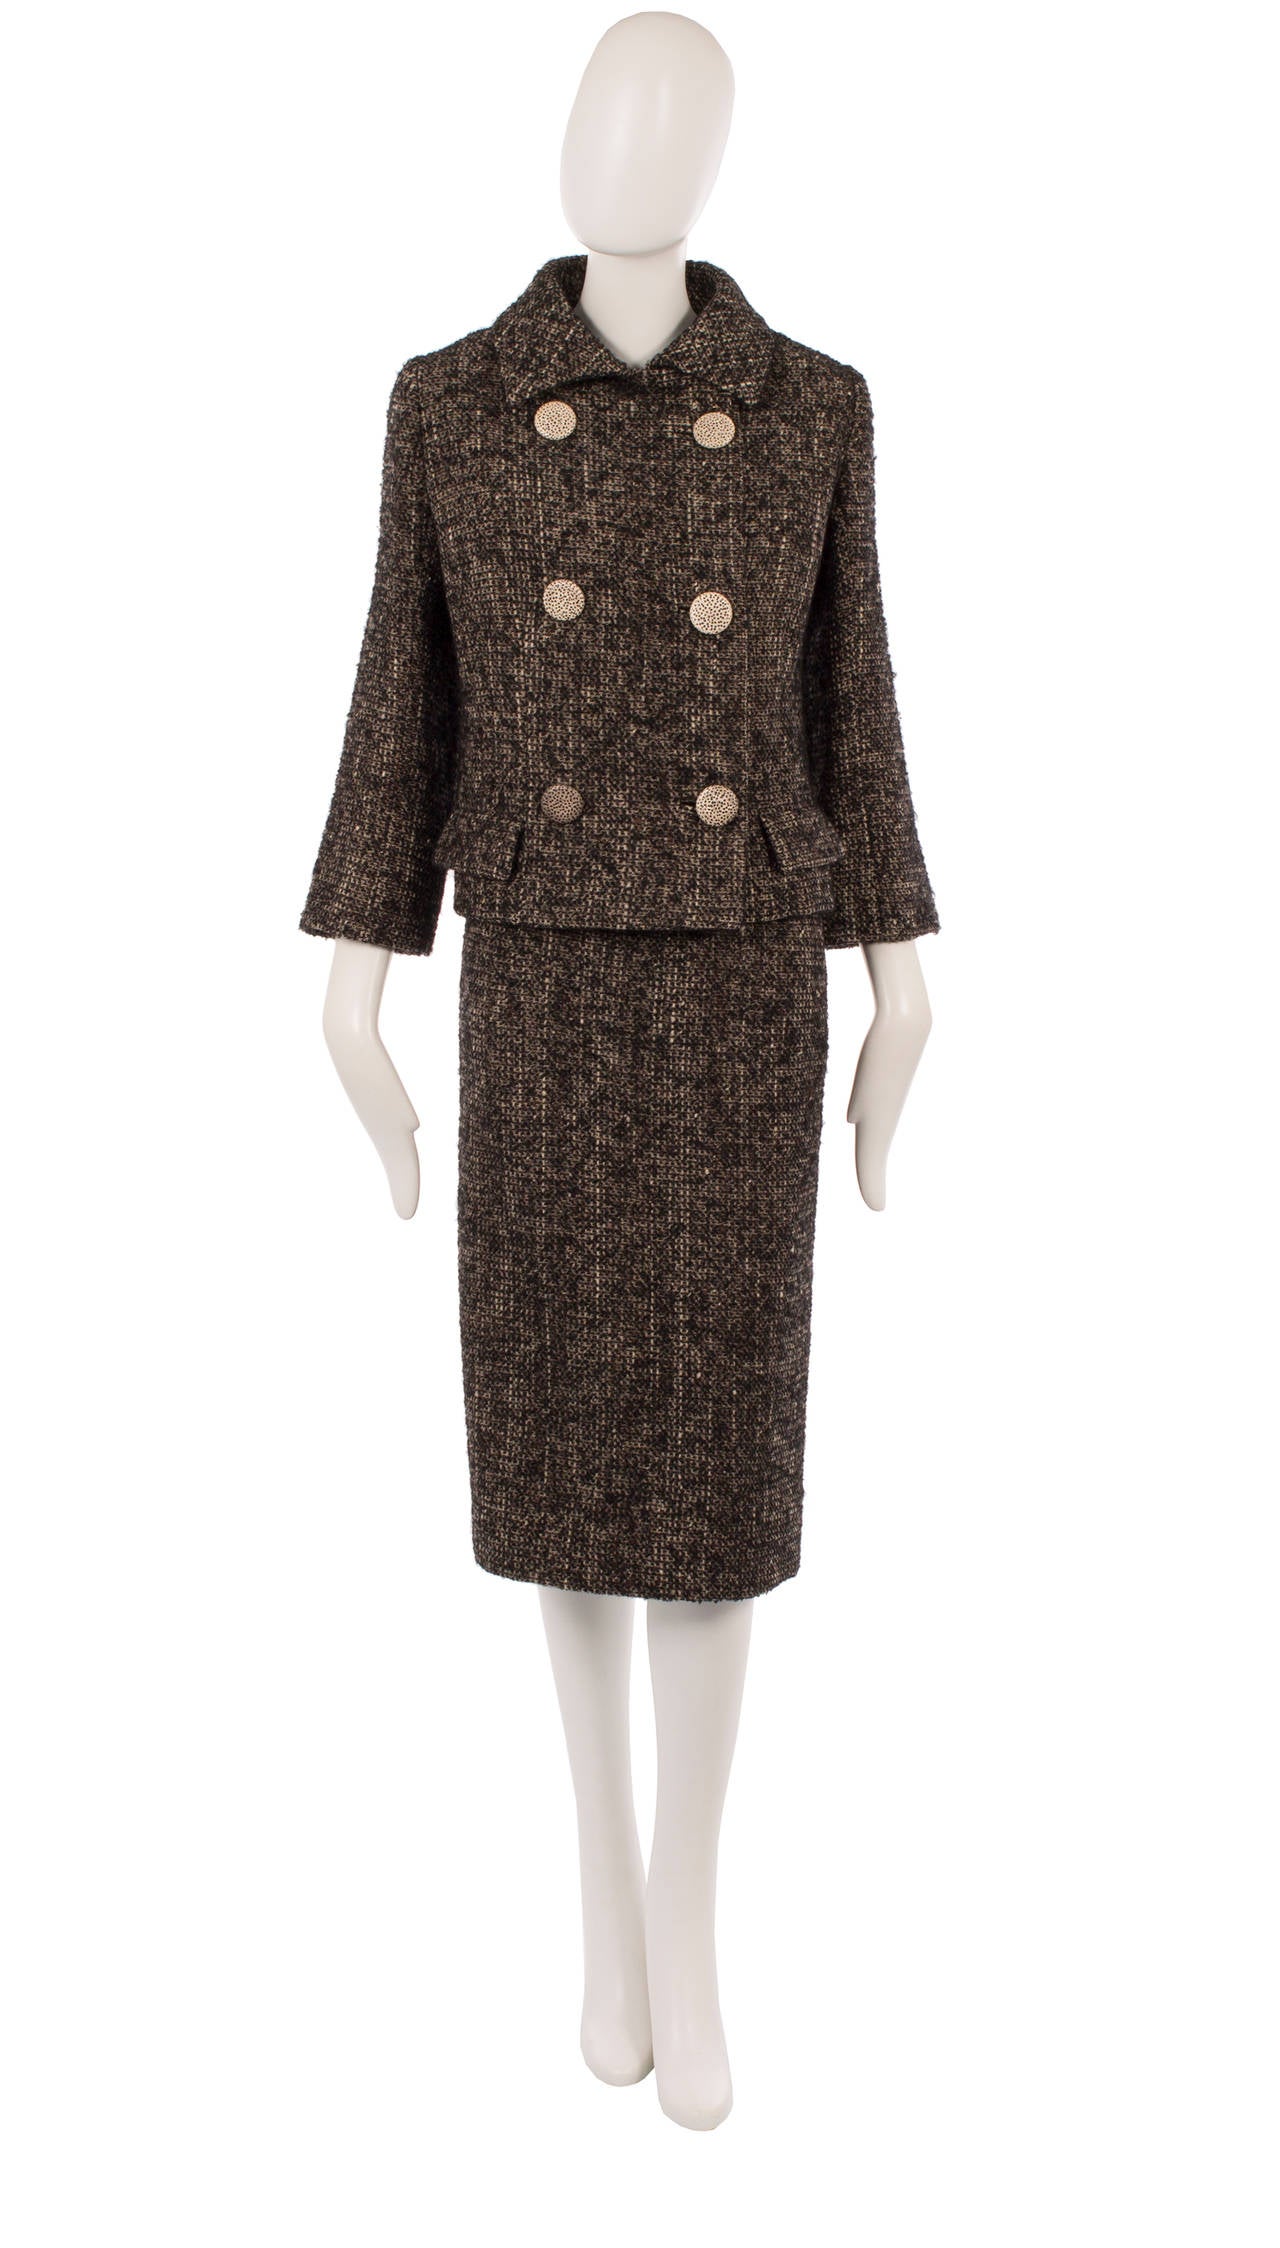 This Balenciaga haute couture skirt suit would make a great addition to any work wardrobe. Constructed in ivory, brown and black tweed, the boxy jacket is balanced by the slim cut of the skirt, creating a flattering silhouette, while the polka dot